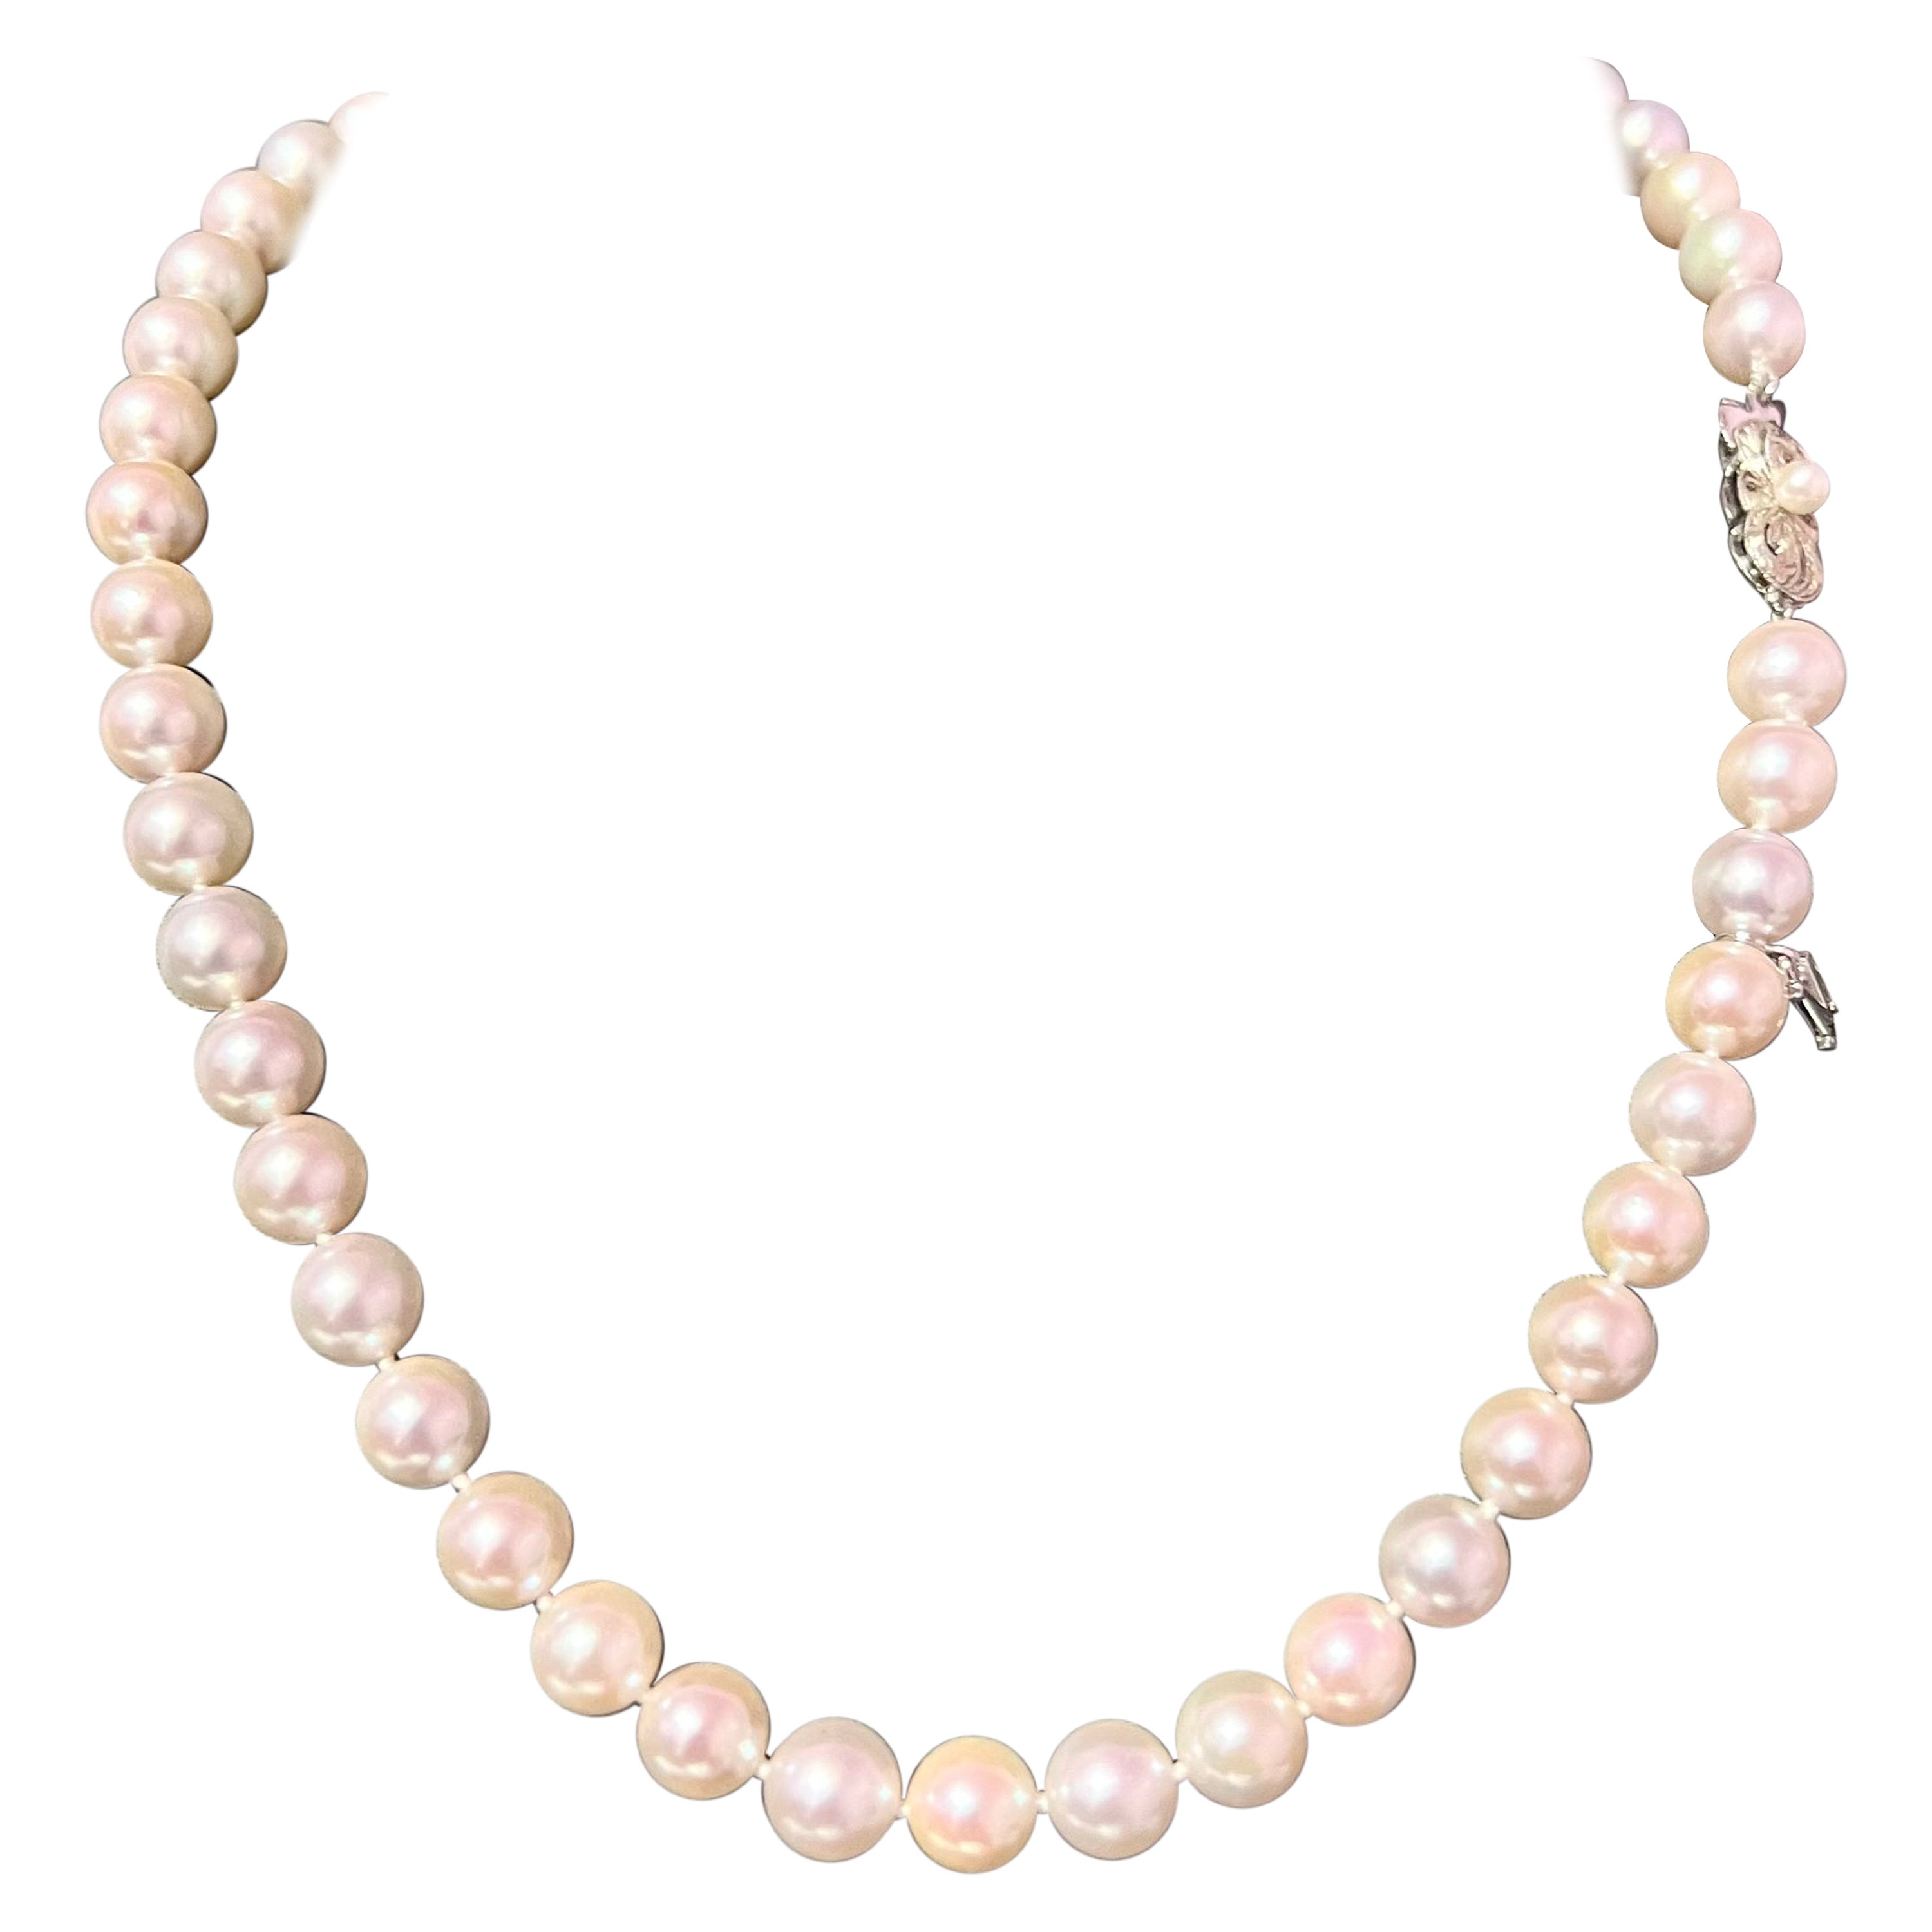 Mikimoto Estate Akoya Pearl Necklace 17" 18k Gold 8 mm Certified For Sale